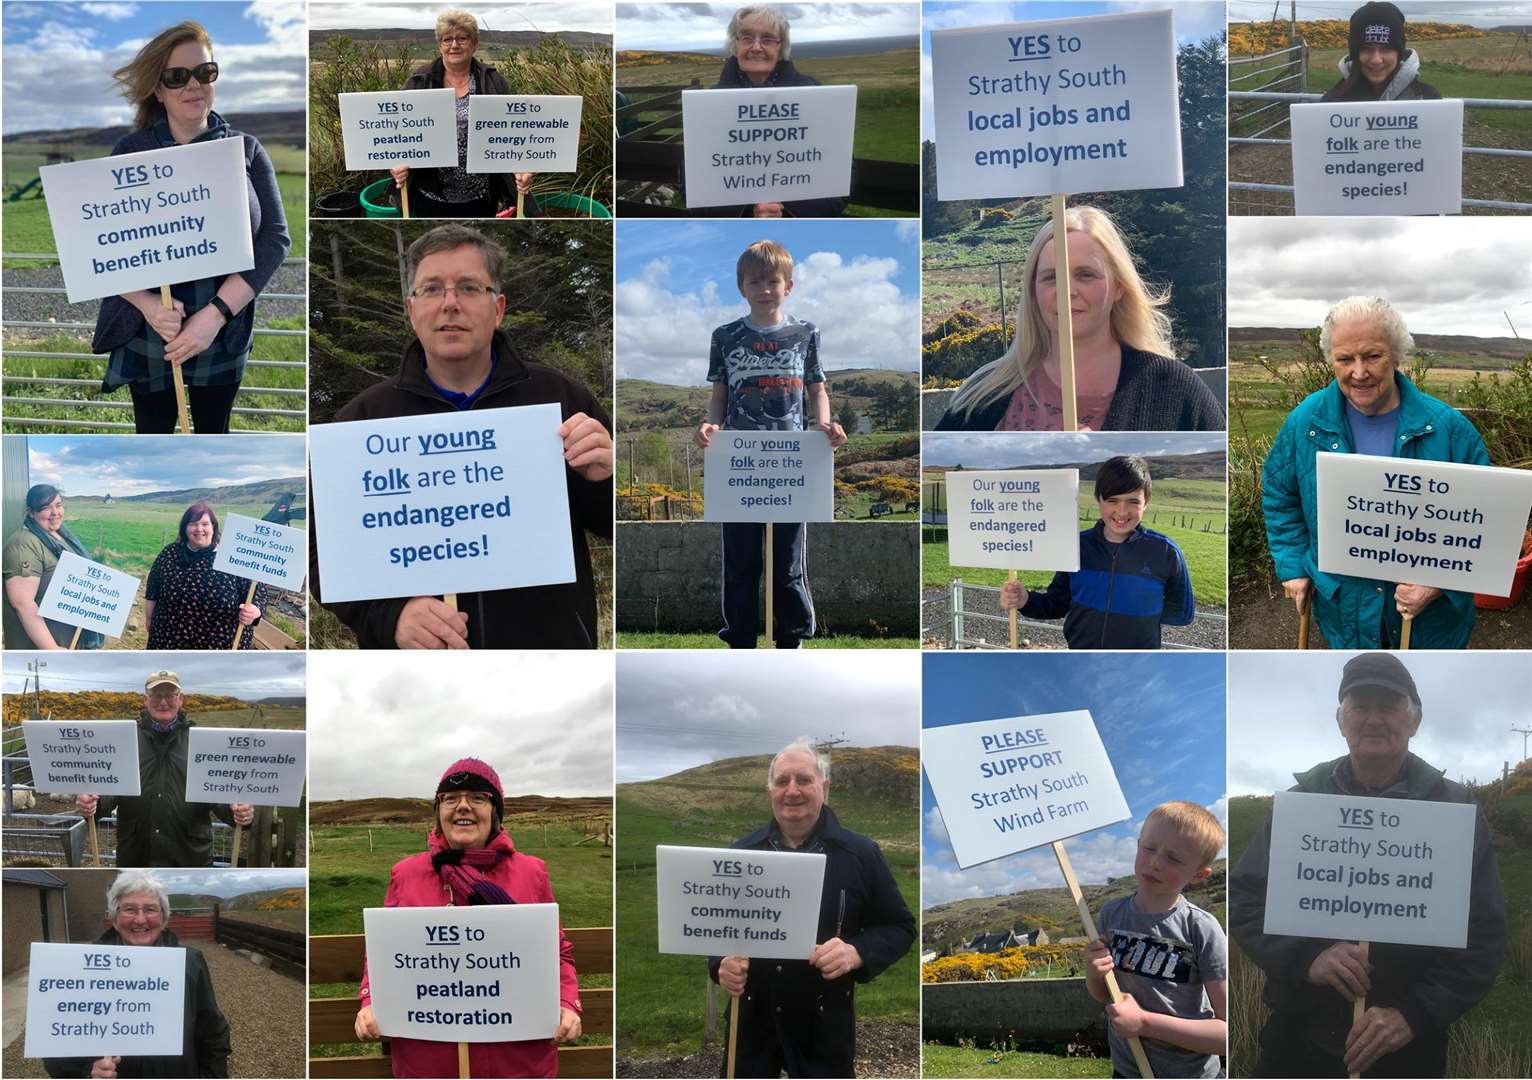 Local residents have demonstrated their support for the Strathy South wind farm by carrying placards.